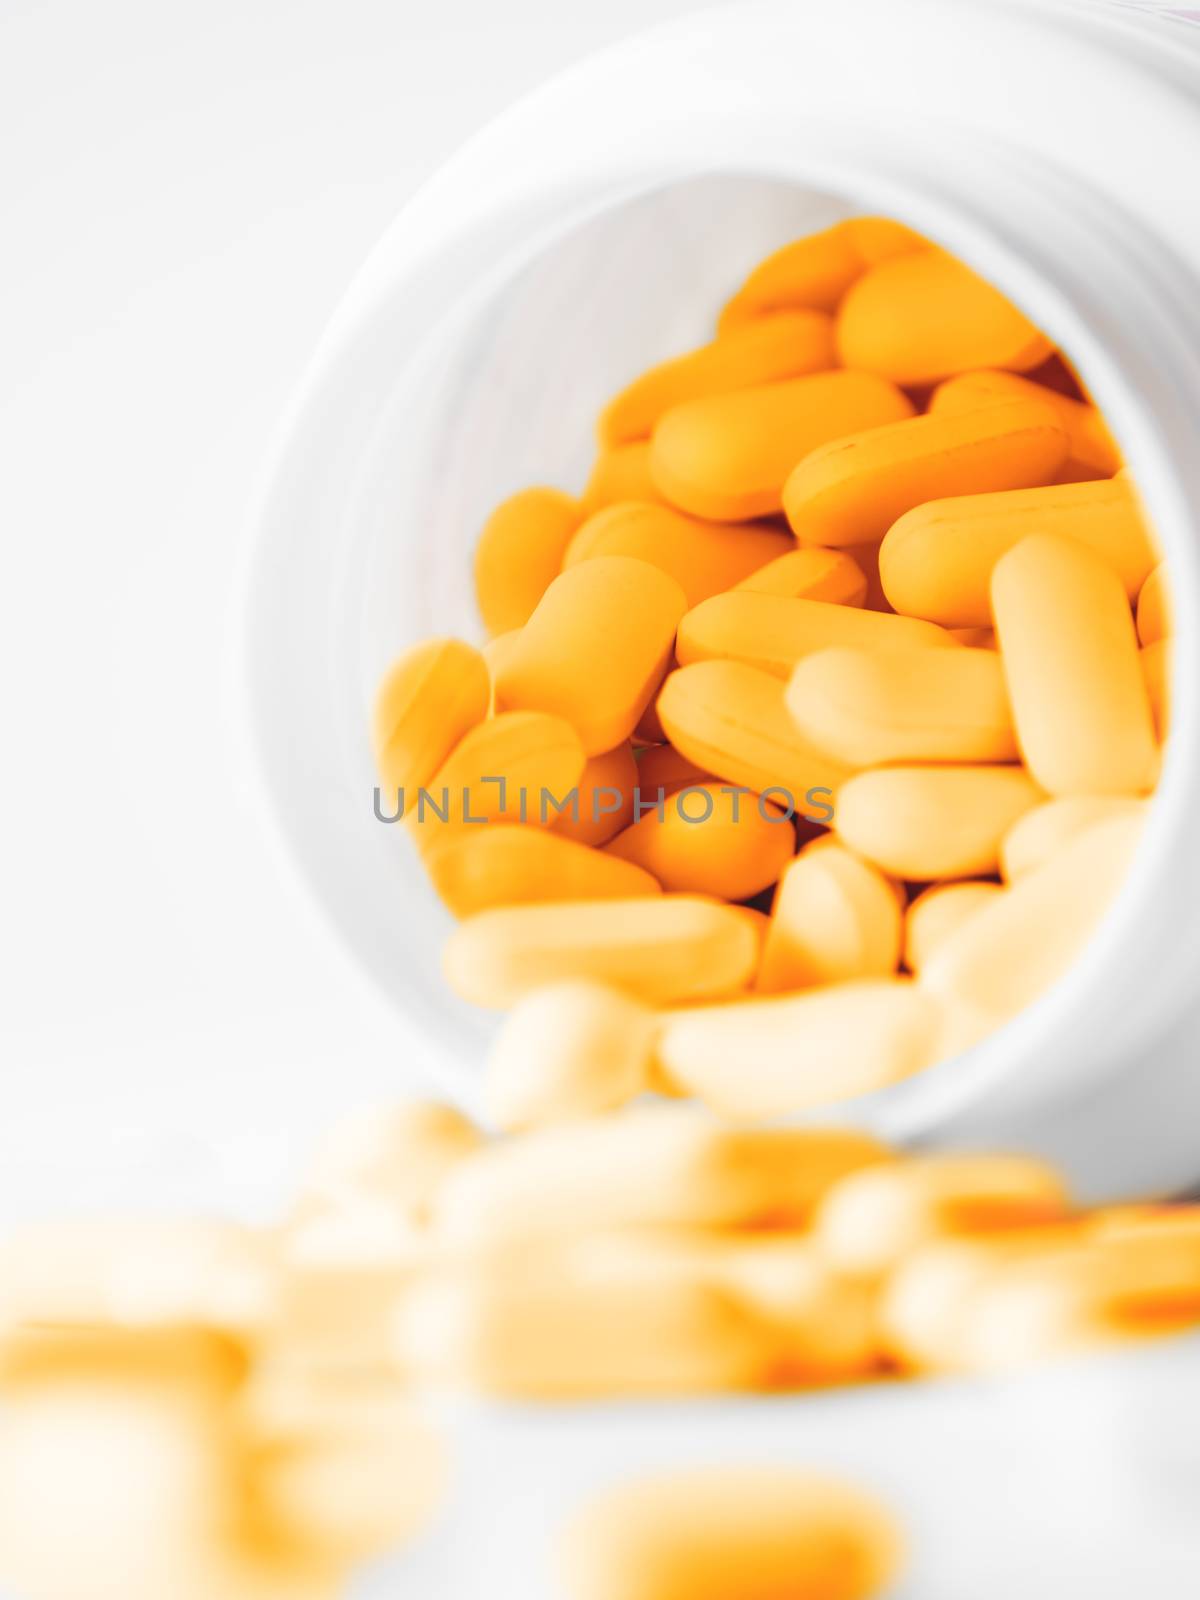 Orange pills spilled out of a plastic jar. Medicine capsules on white background.